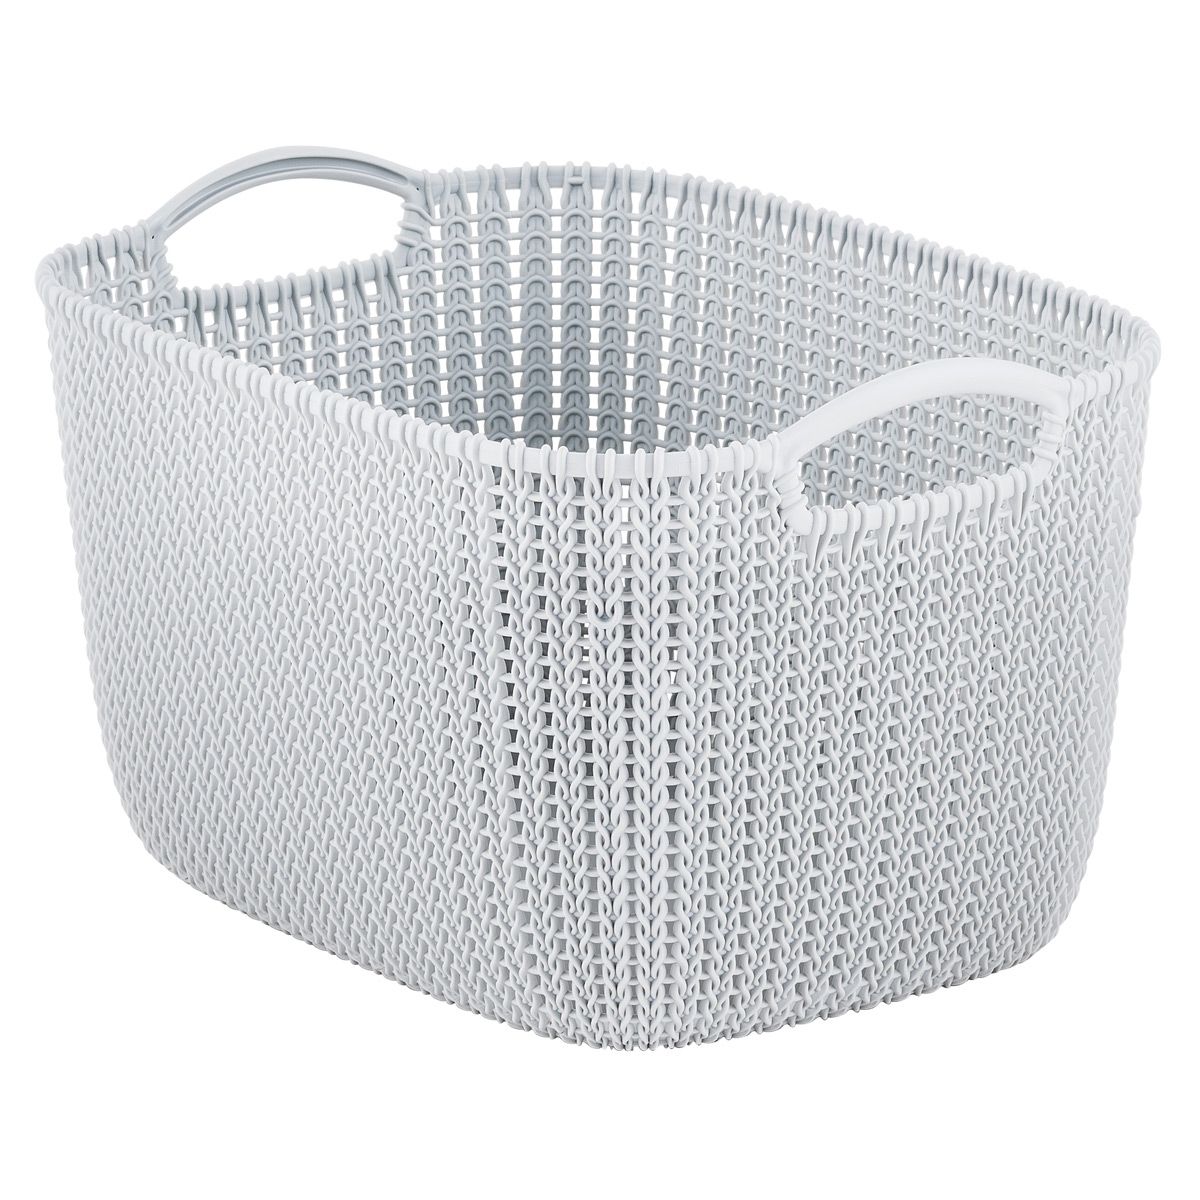 Curver Large Knit Basket Cloudy Grey | The Container Store